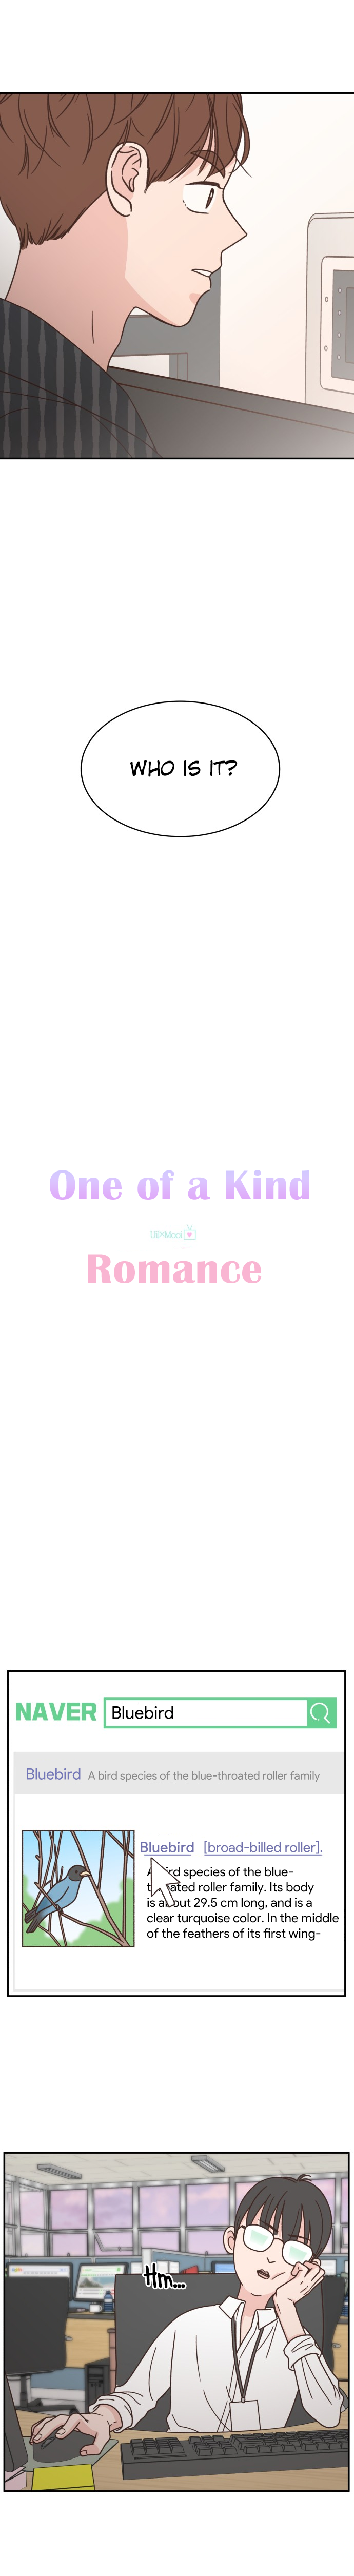 One Of A Kind Romance - Page 3